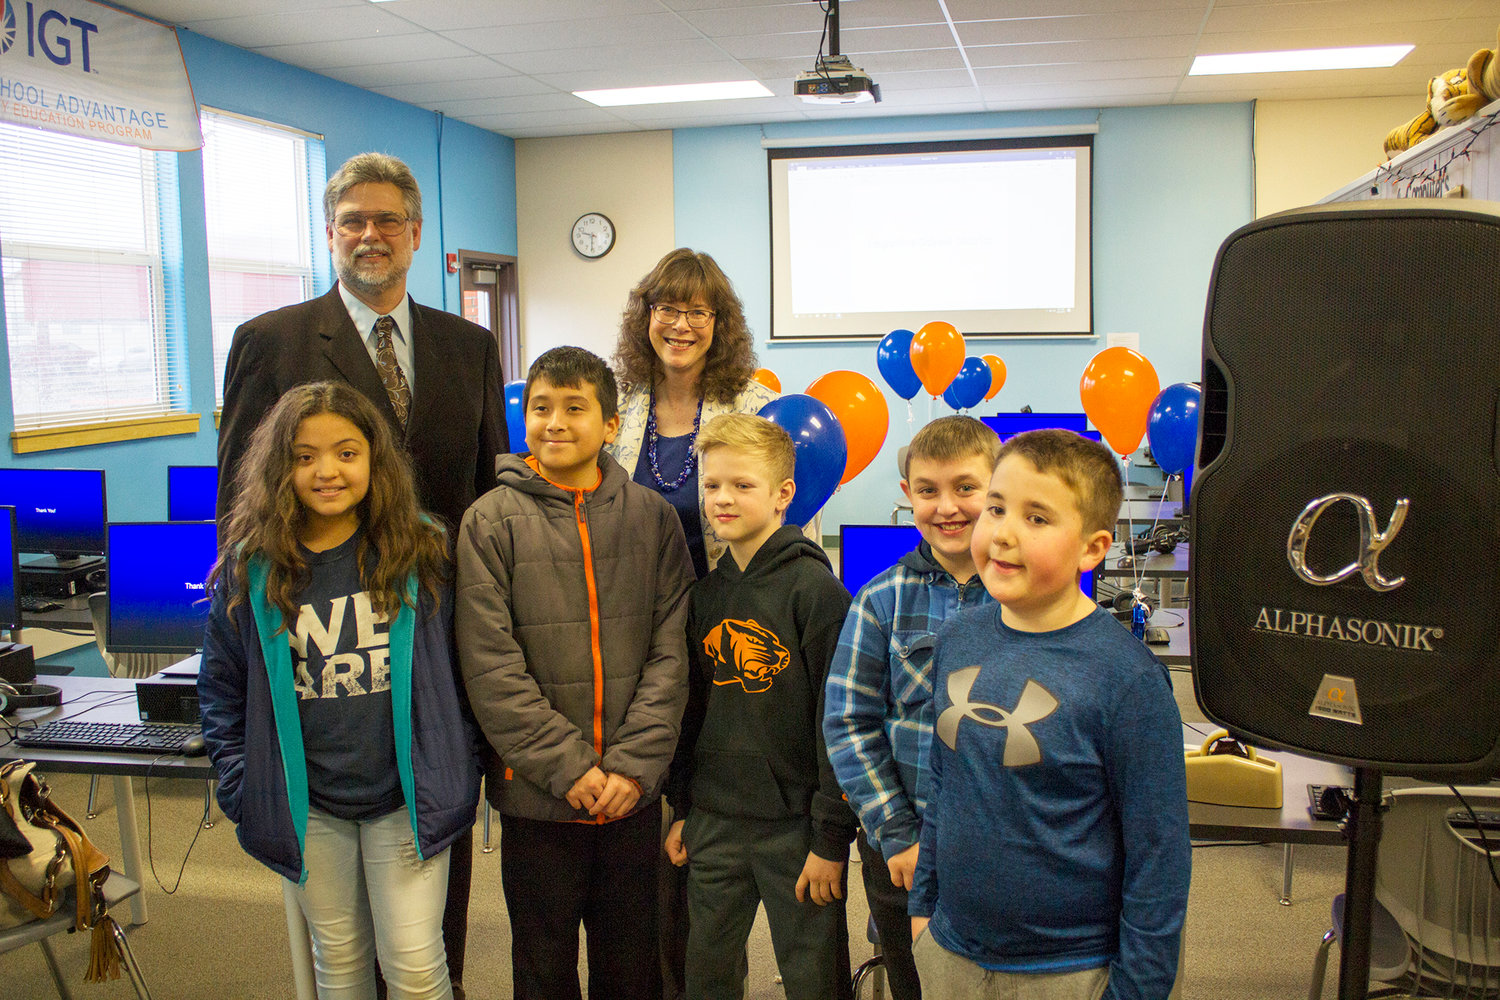 Representative Ed Orcutt, R-Kalama, and Ruth Peterson from the office of Senator John Braun, R-Centralia, stand in the upgraded lab with fourth grade Napavine Elementary School students. From left to right: Ivy Torres, Santos Alvarado, Caleb Vonpressentin, Nolan Fulleton and Gavin Brevard.